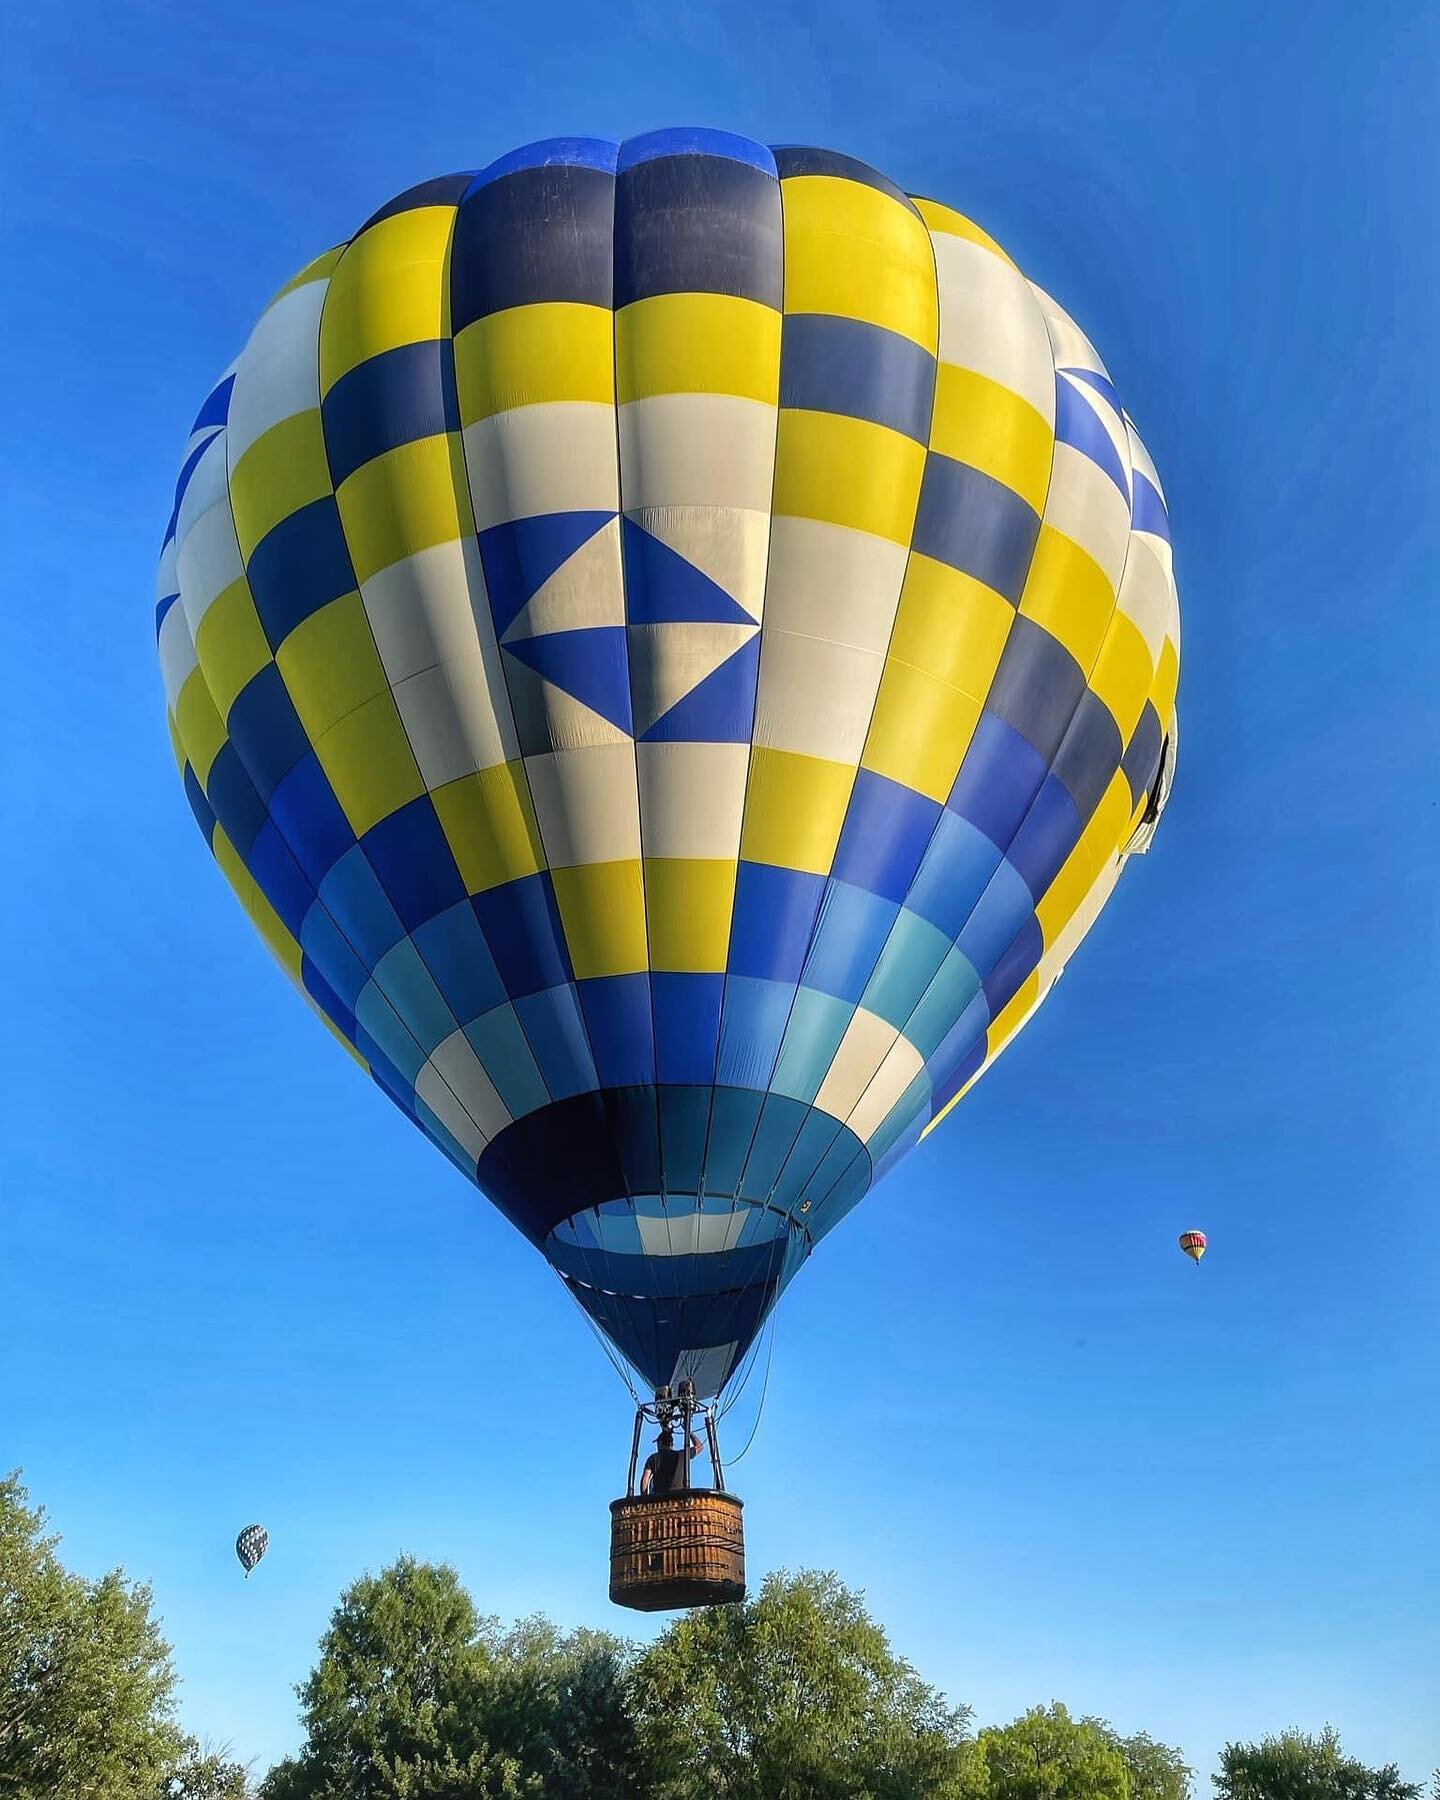 @thenationalballoonclassic starts tonight! Looking for something to do while you wait for the first launch? Check the links in our bio for ideas of how to #wanderwarrencounty!

📸: @mweeks45 

#balloons #hotairballoon #thisisiowa #catchdsm #iowasumme